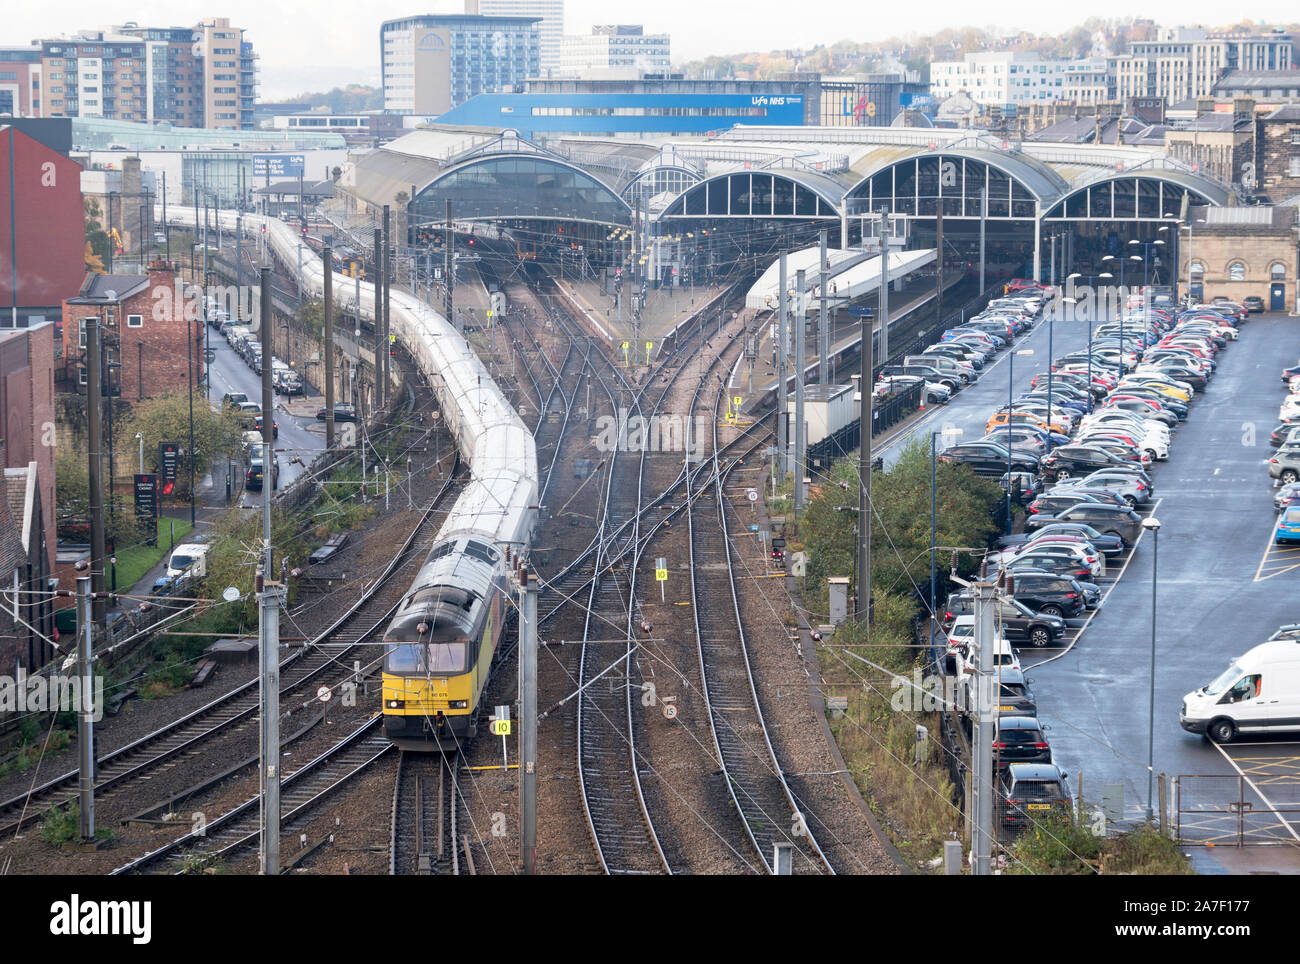 A long biomass freight train hauled by a class 60 diesel locomotive snakes its way past the complex junction at Newcastle Central Station, England, UK Stock Photo